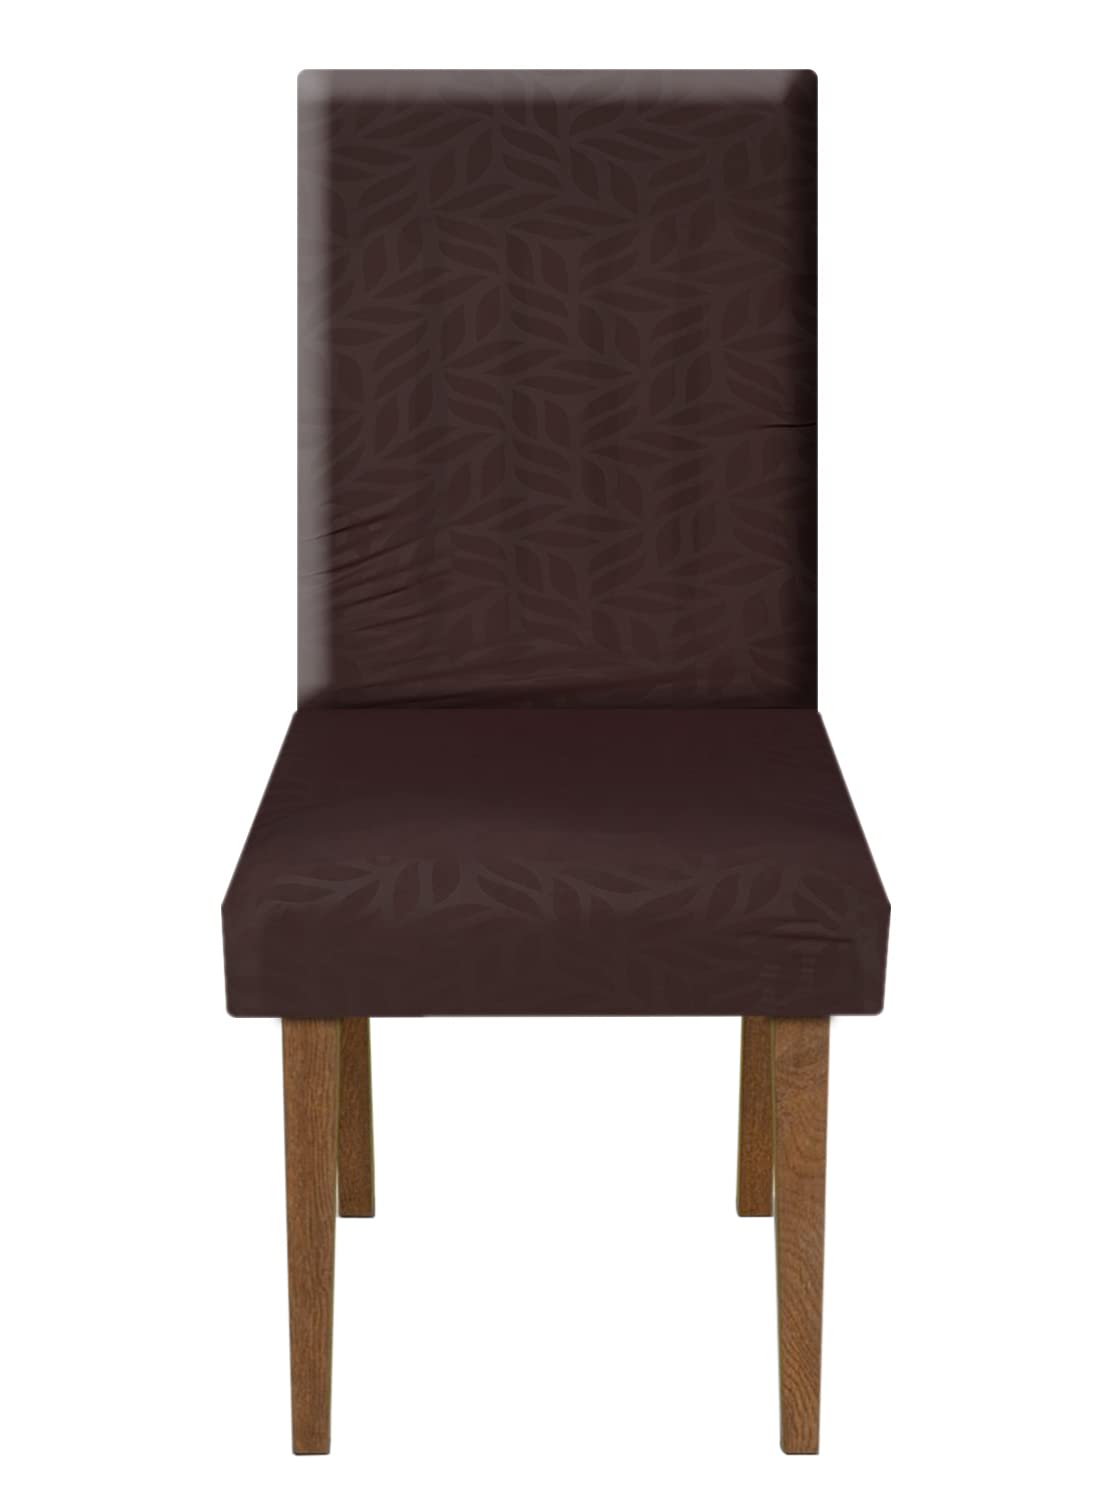 Kuber Industries Leaf Printed Elastic Stretchable Polyster Chair Cover for Home, Office, Hotels, Wedding Banquet (Brown)-50KM0999